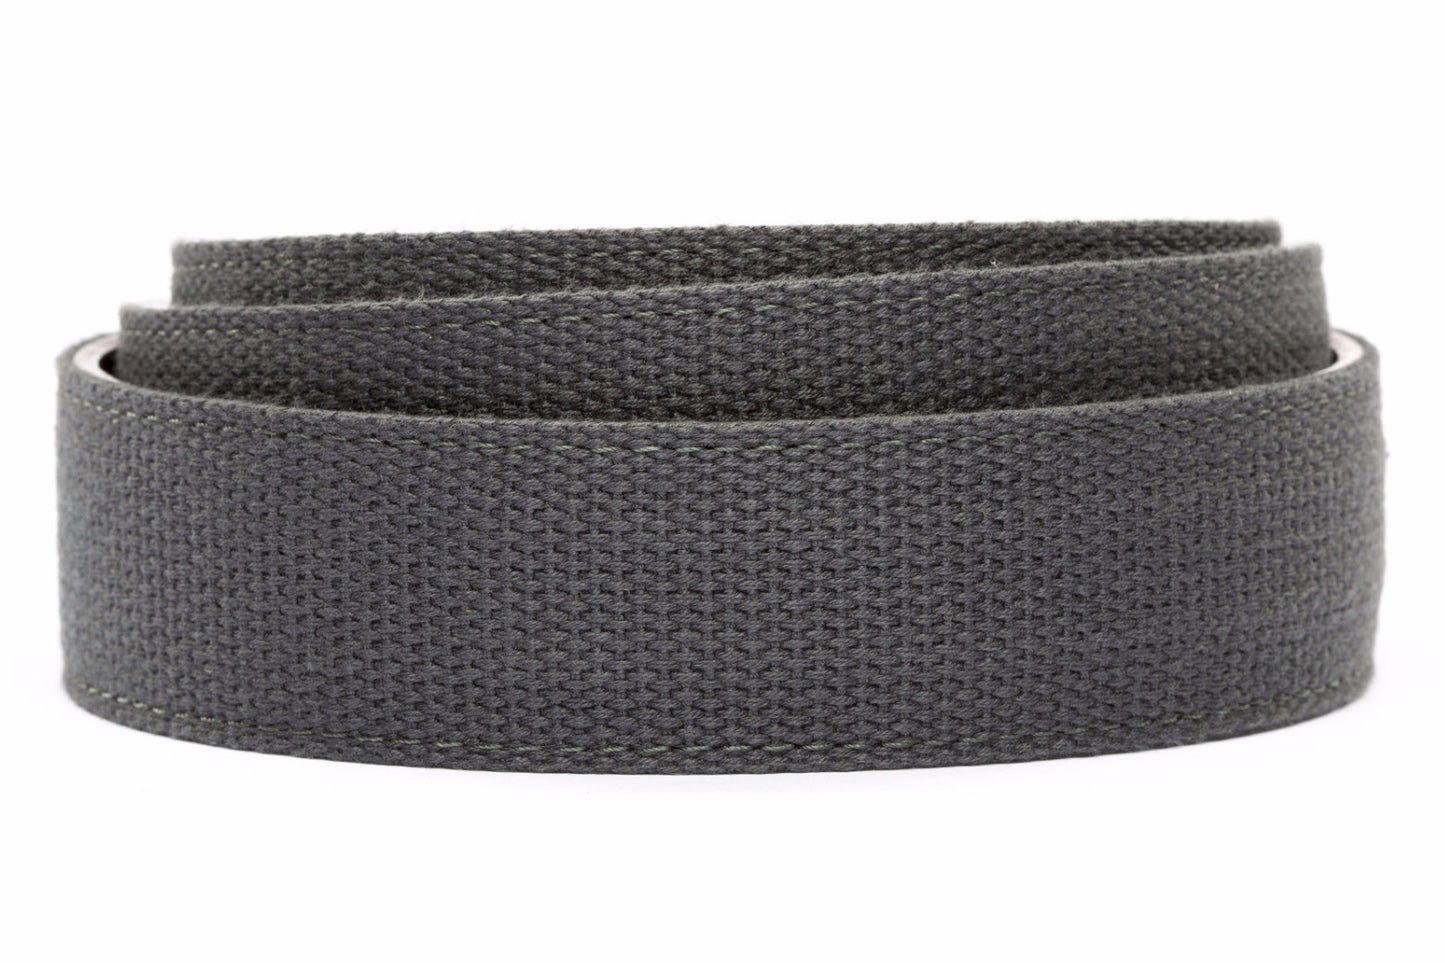 Men's canvas belt strap in graphite, 1.5 inches wide, casual look